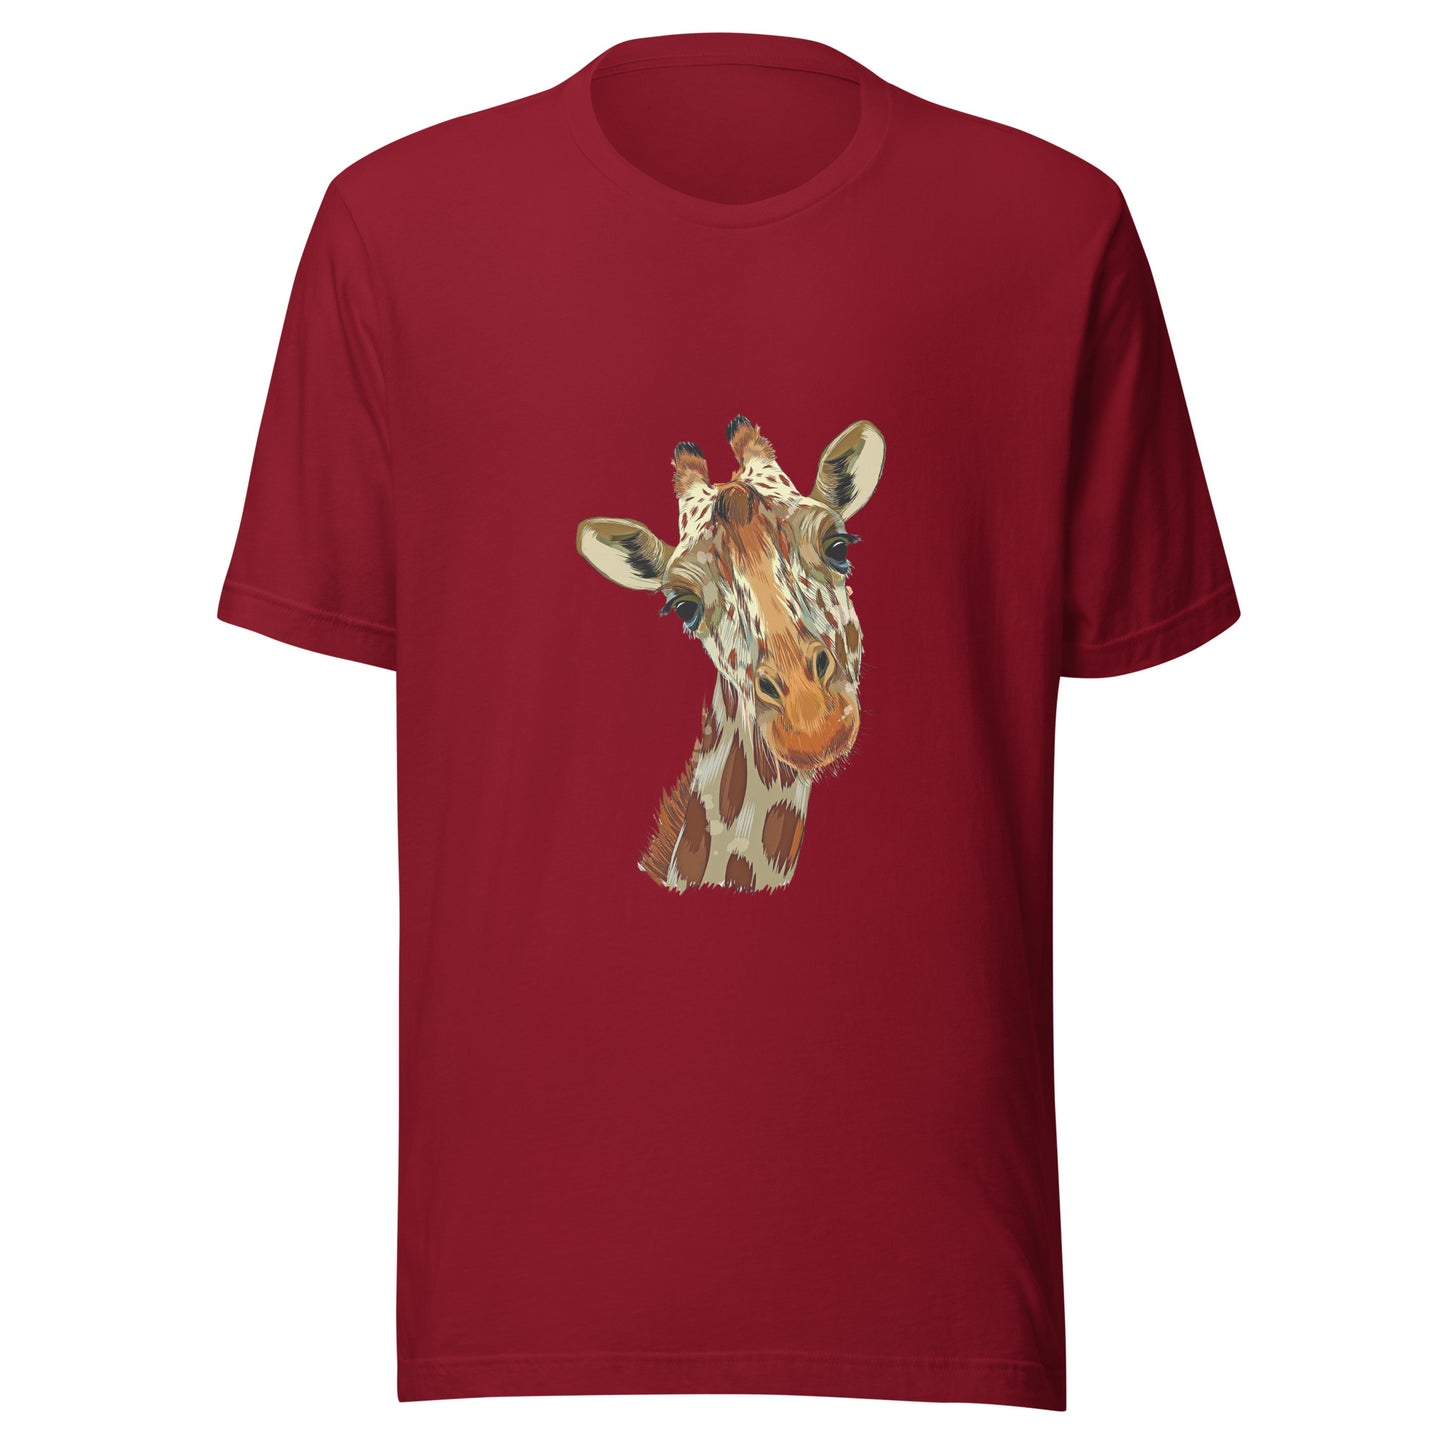 Women and Men's (Unisex) T-Shirt printed with a Quizzical Giraffe